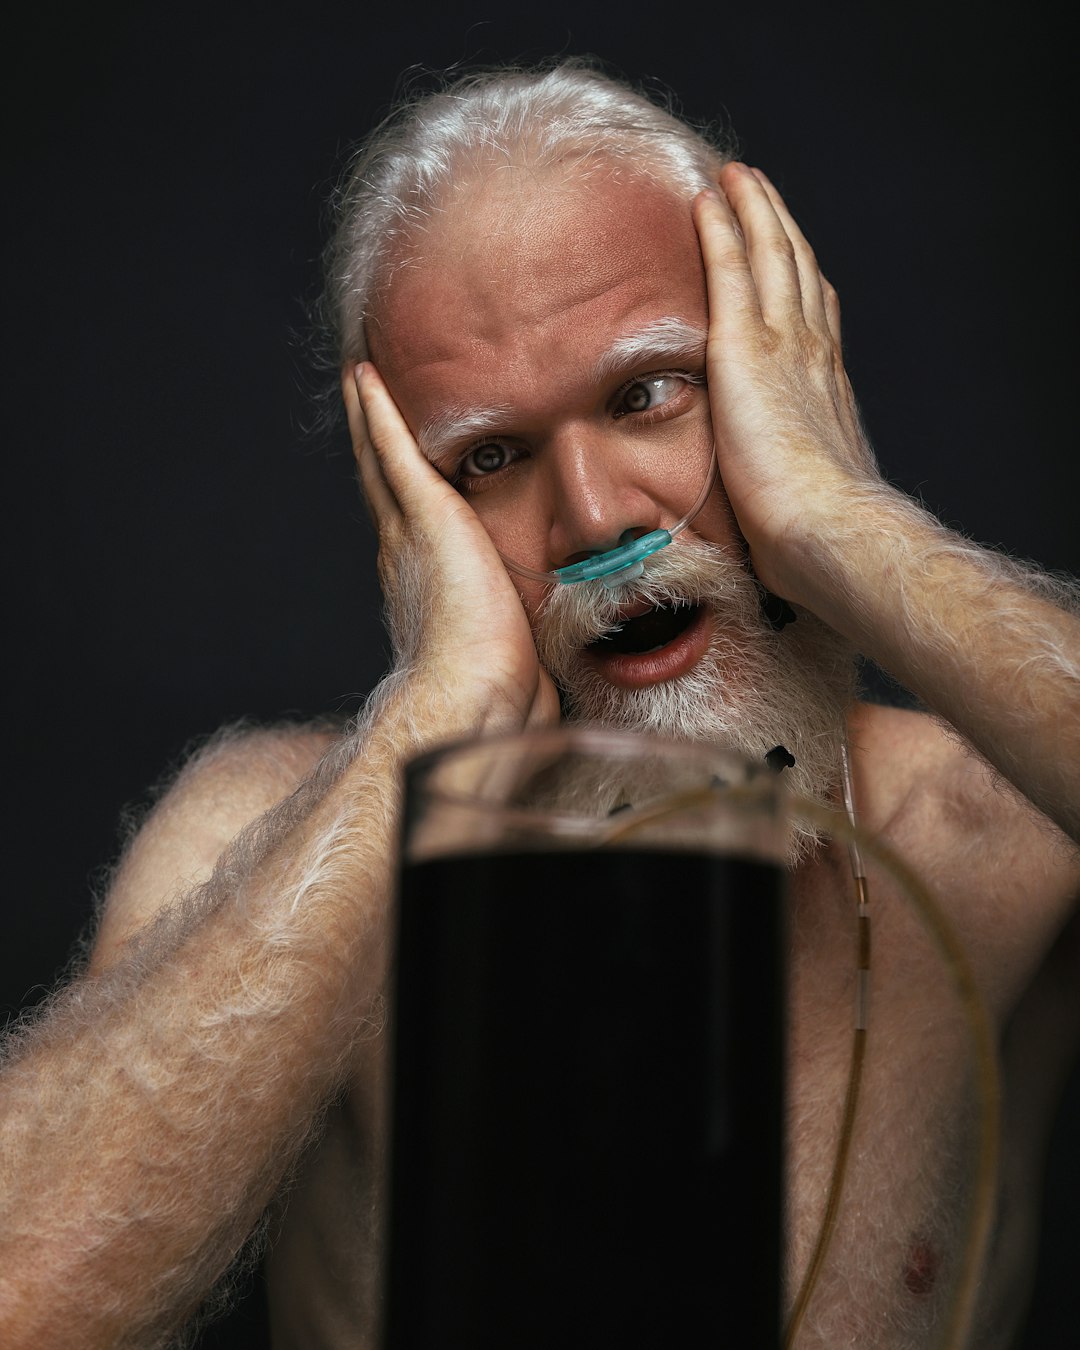 man holding clear drinking glass with black liquid